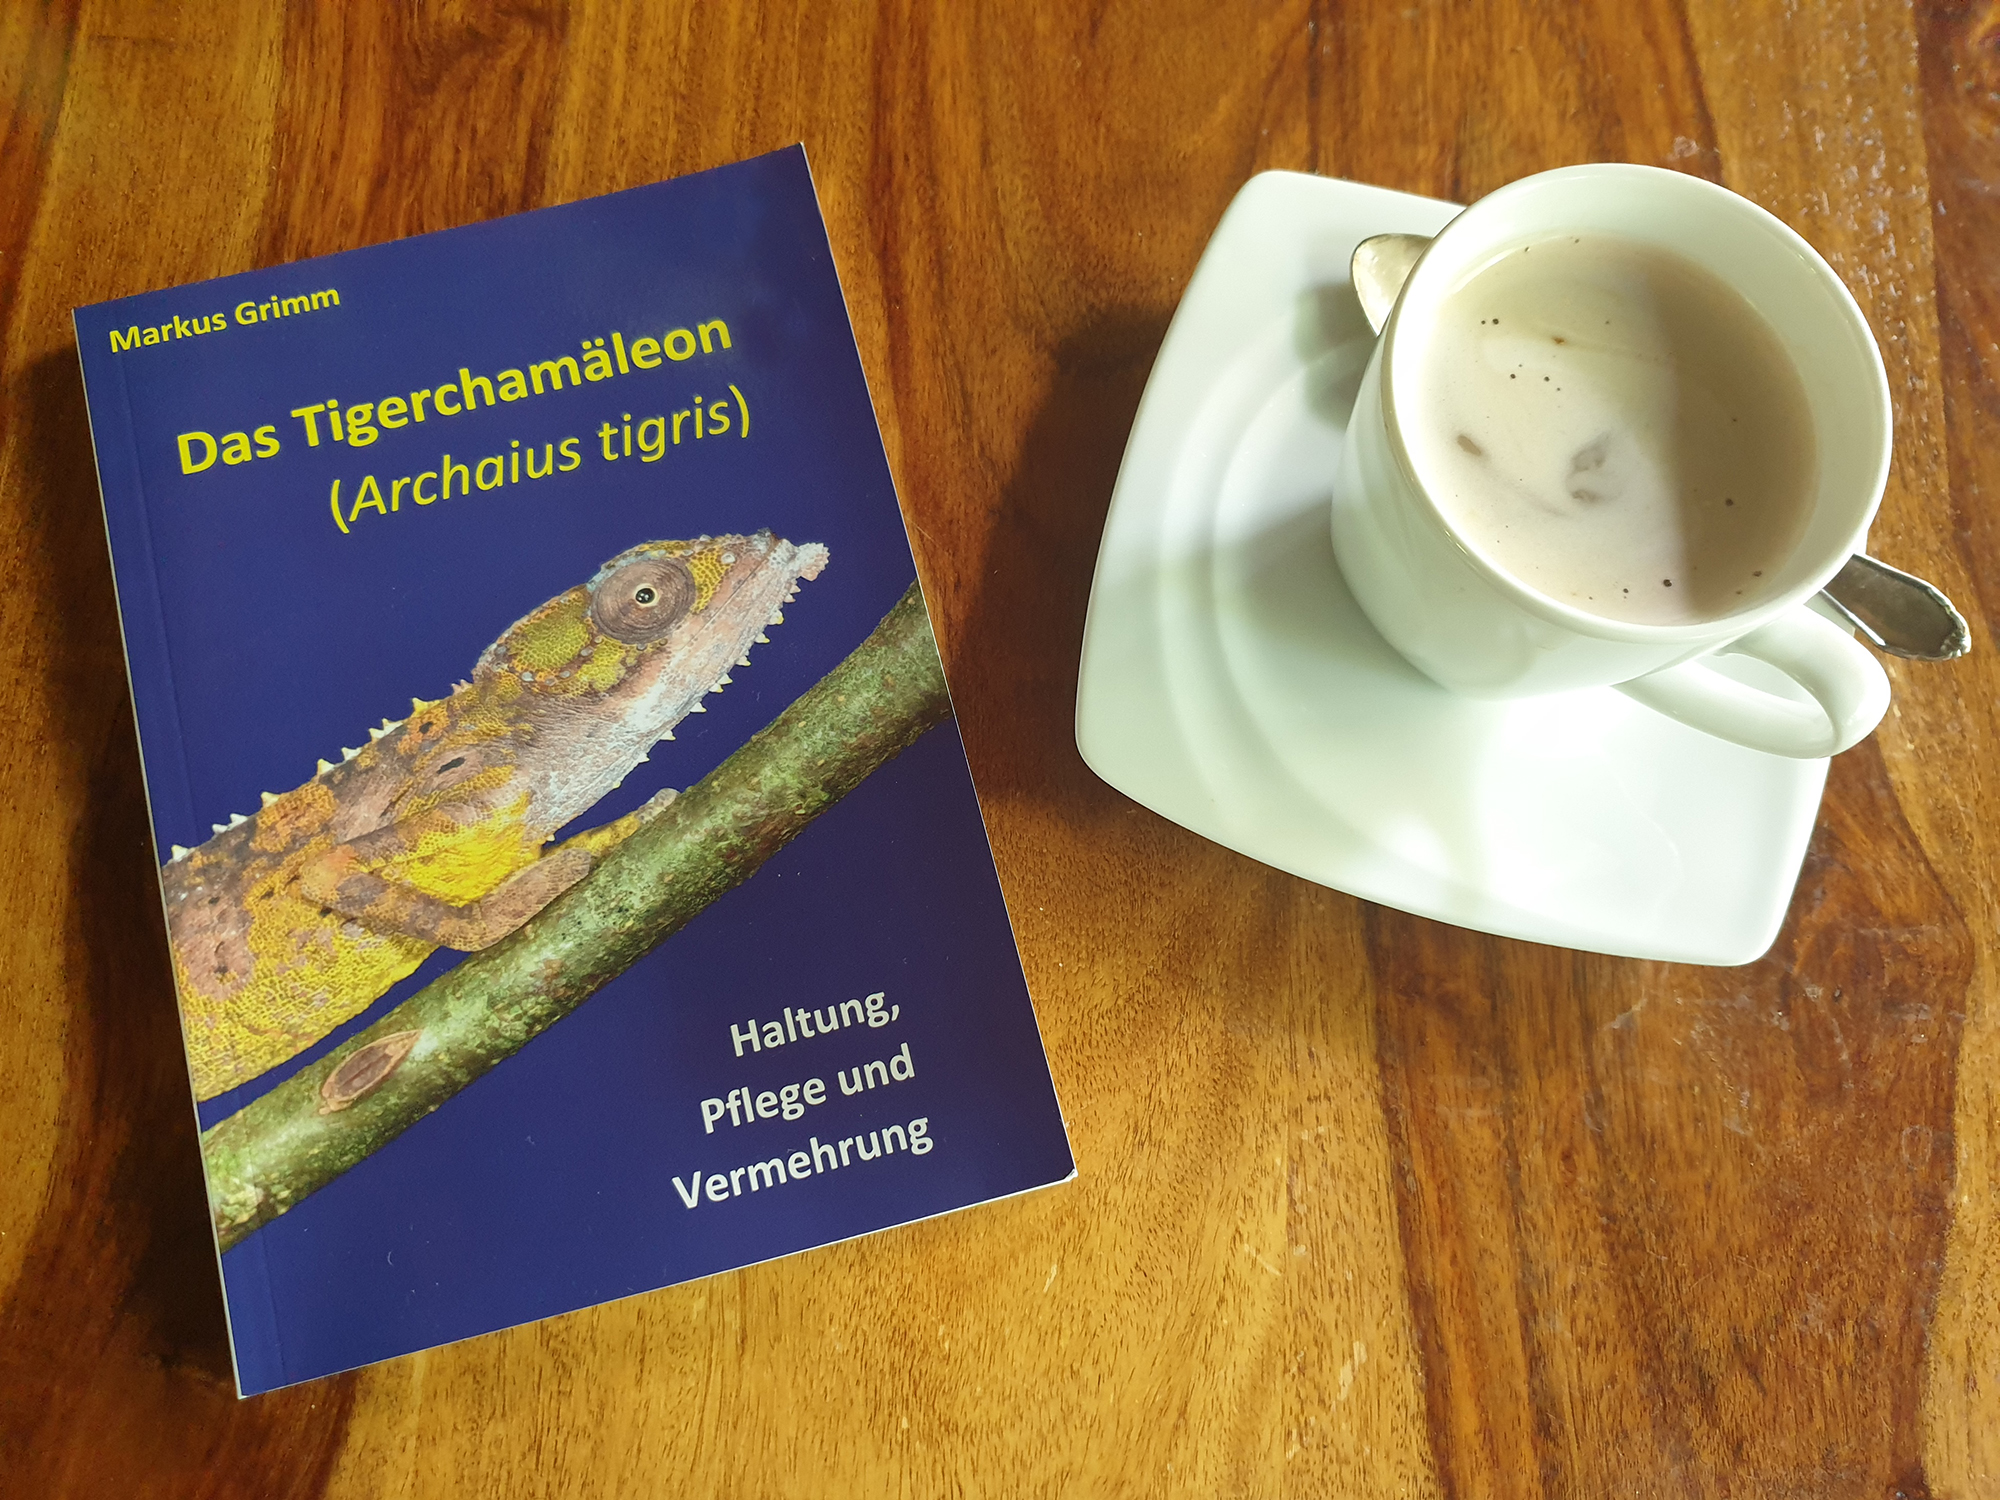 New publication: A book about the tiger chameleon